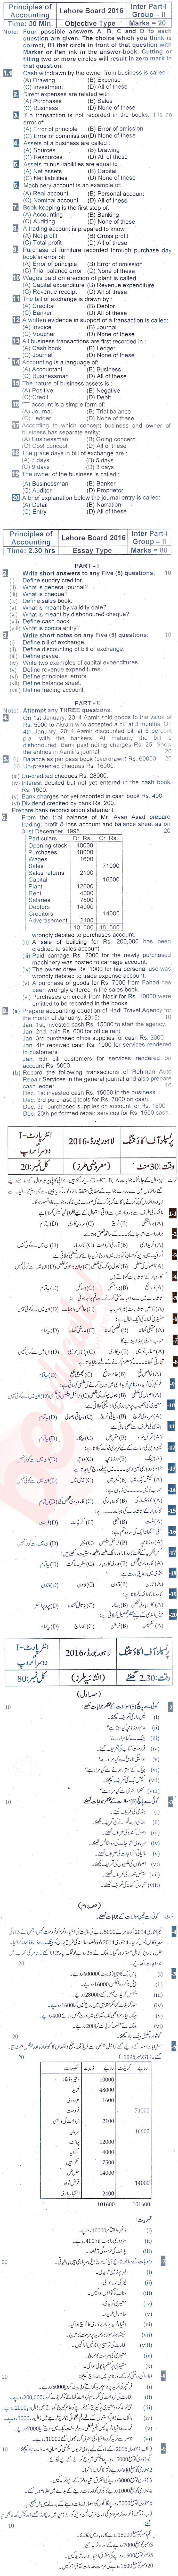 Principles of Accounting ICOM Part 1 Past Paper Group 2 BISE Lahore 2016